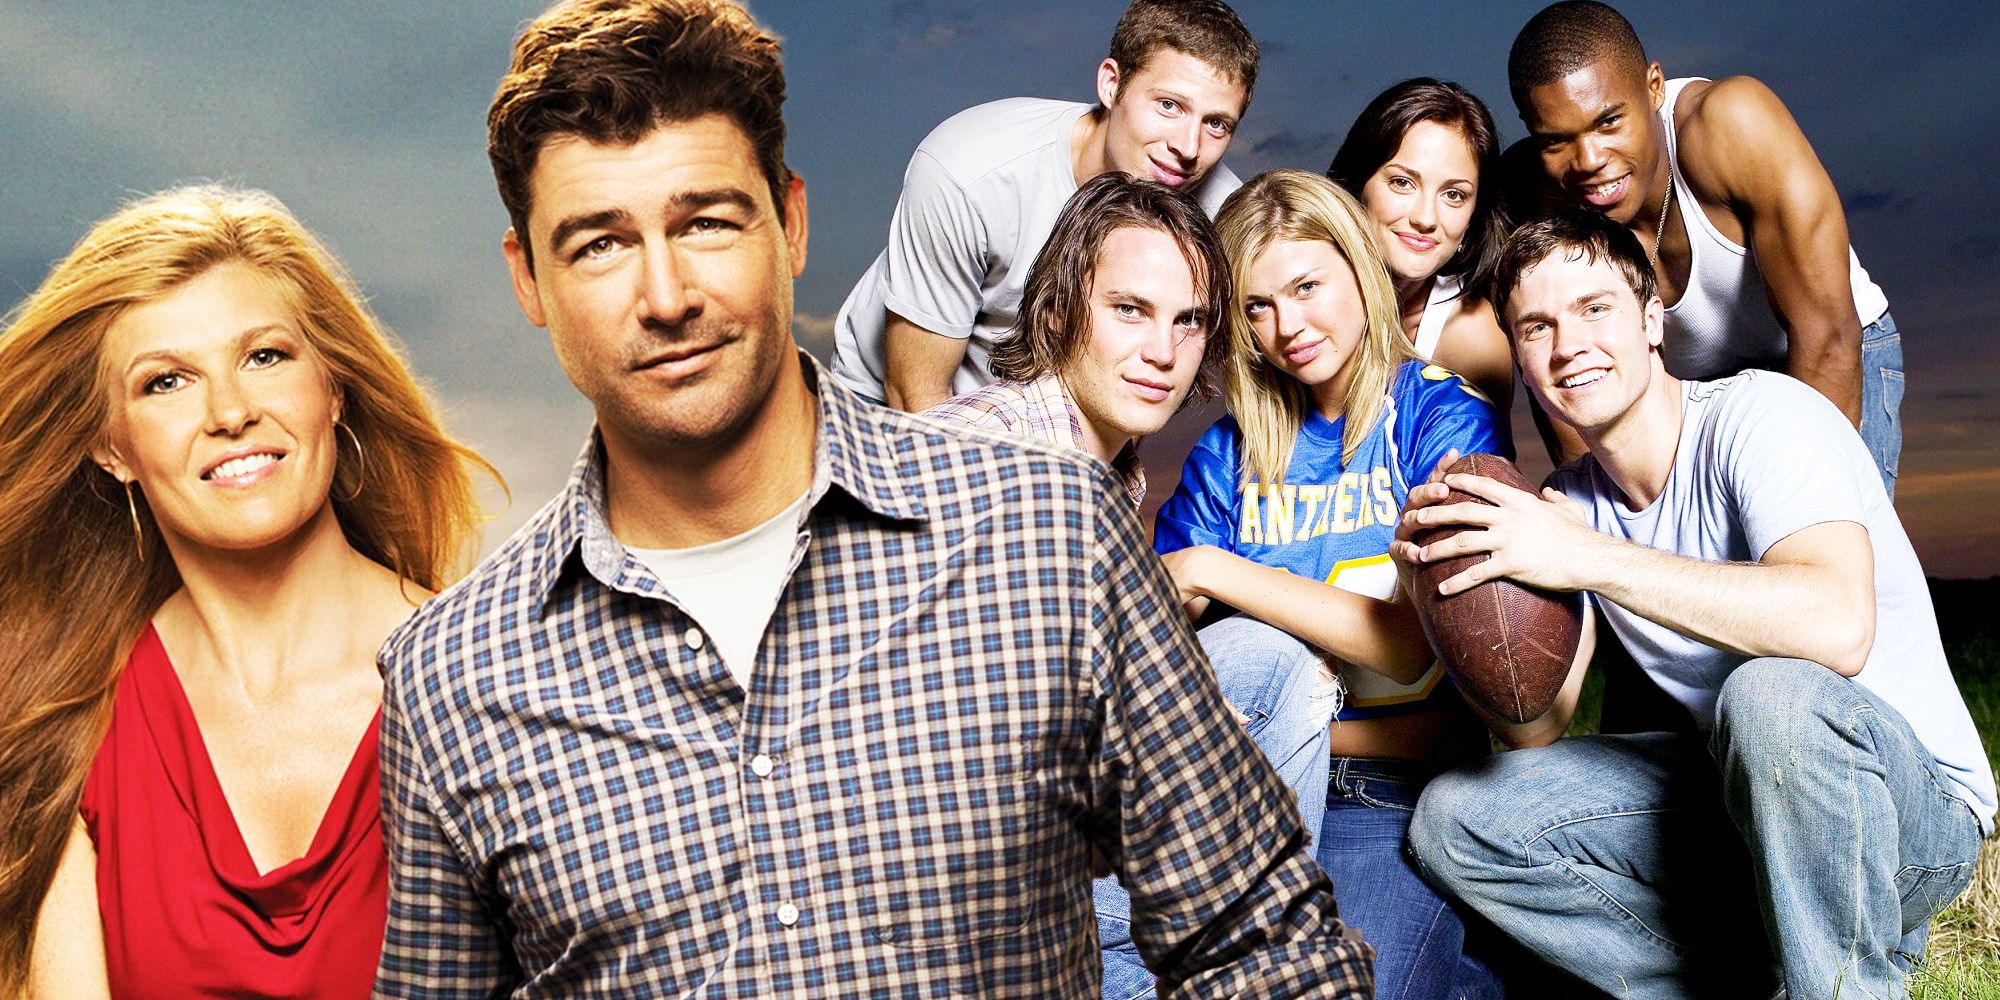 The Friday Night Lights Reboot Faces A Big Modern Day Struggle